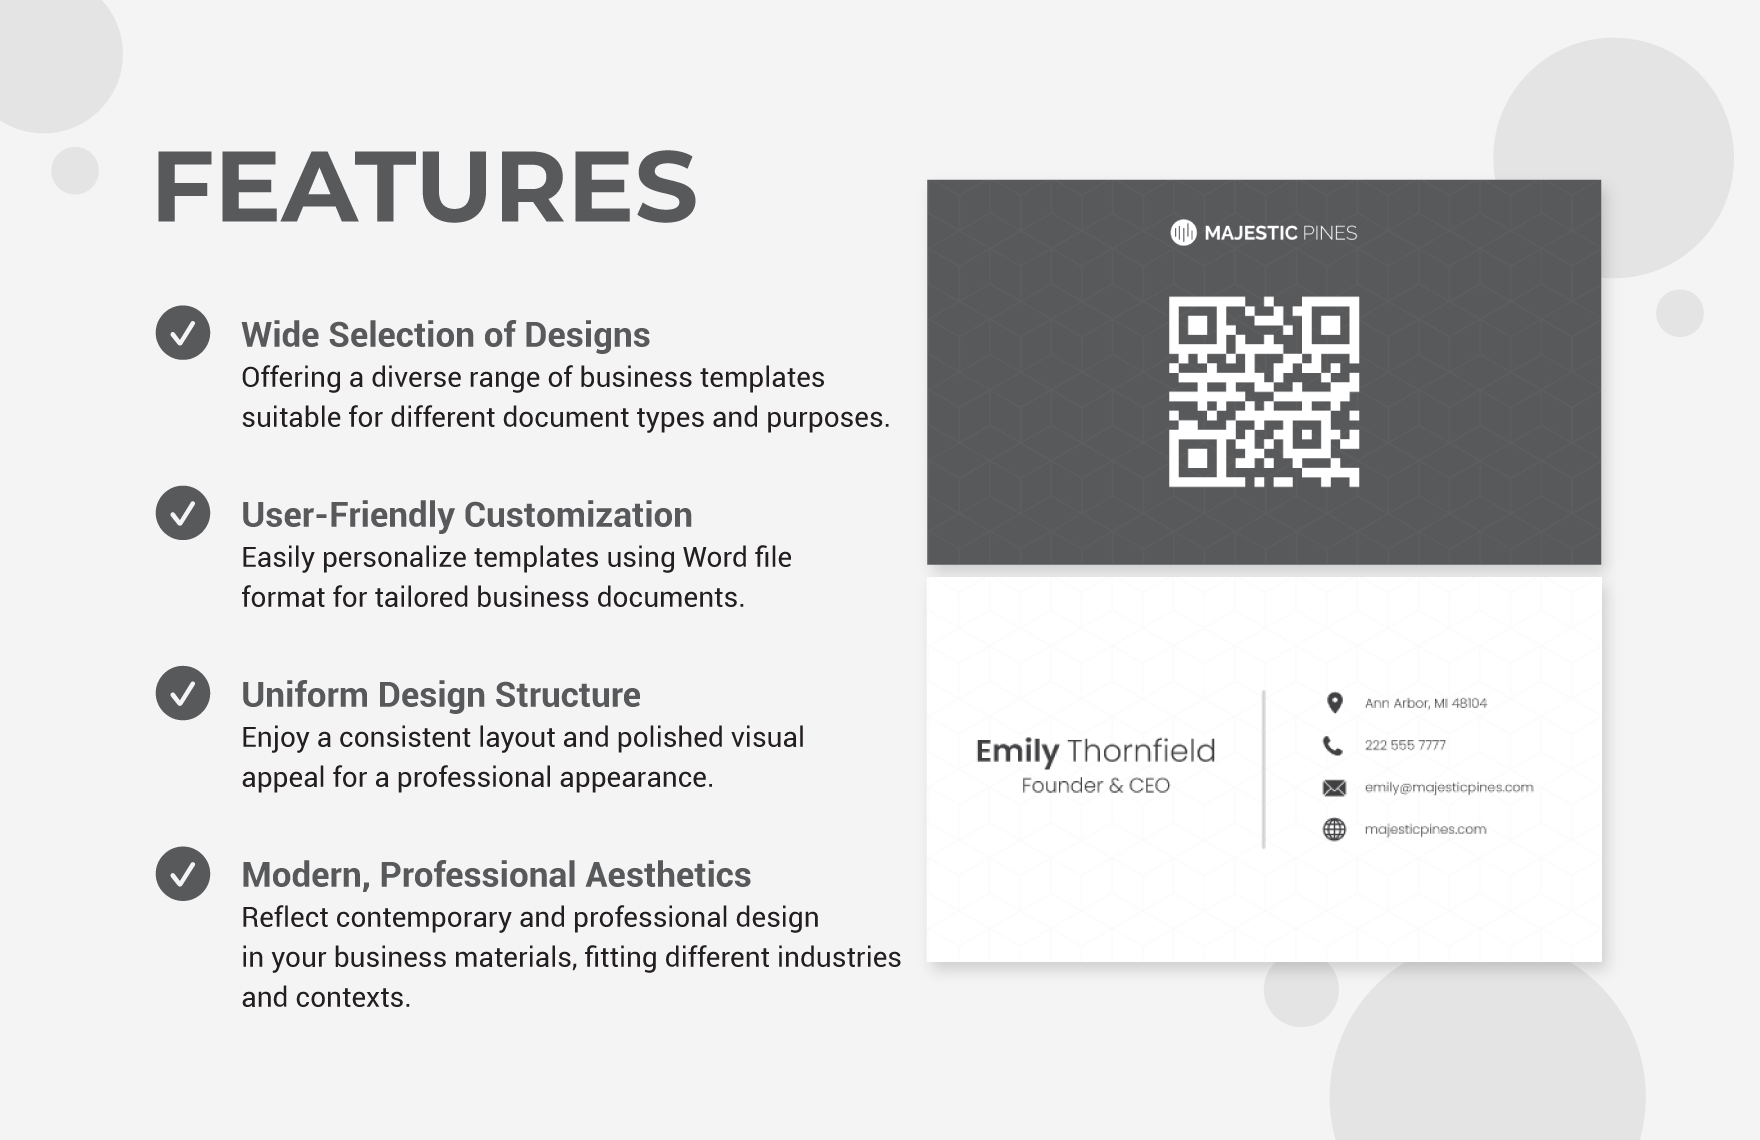 Small Business Card Template